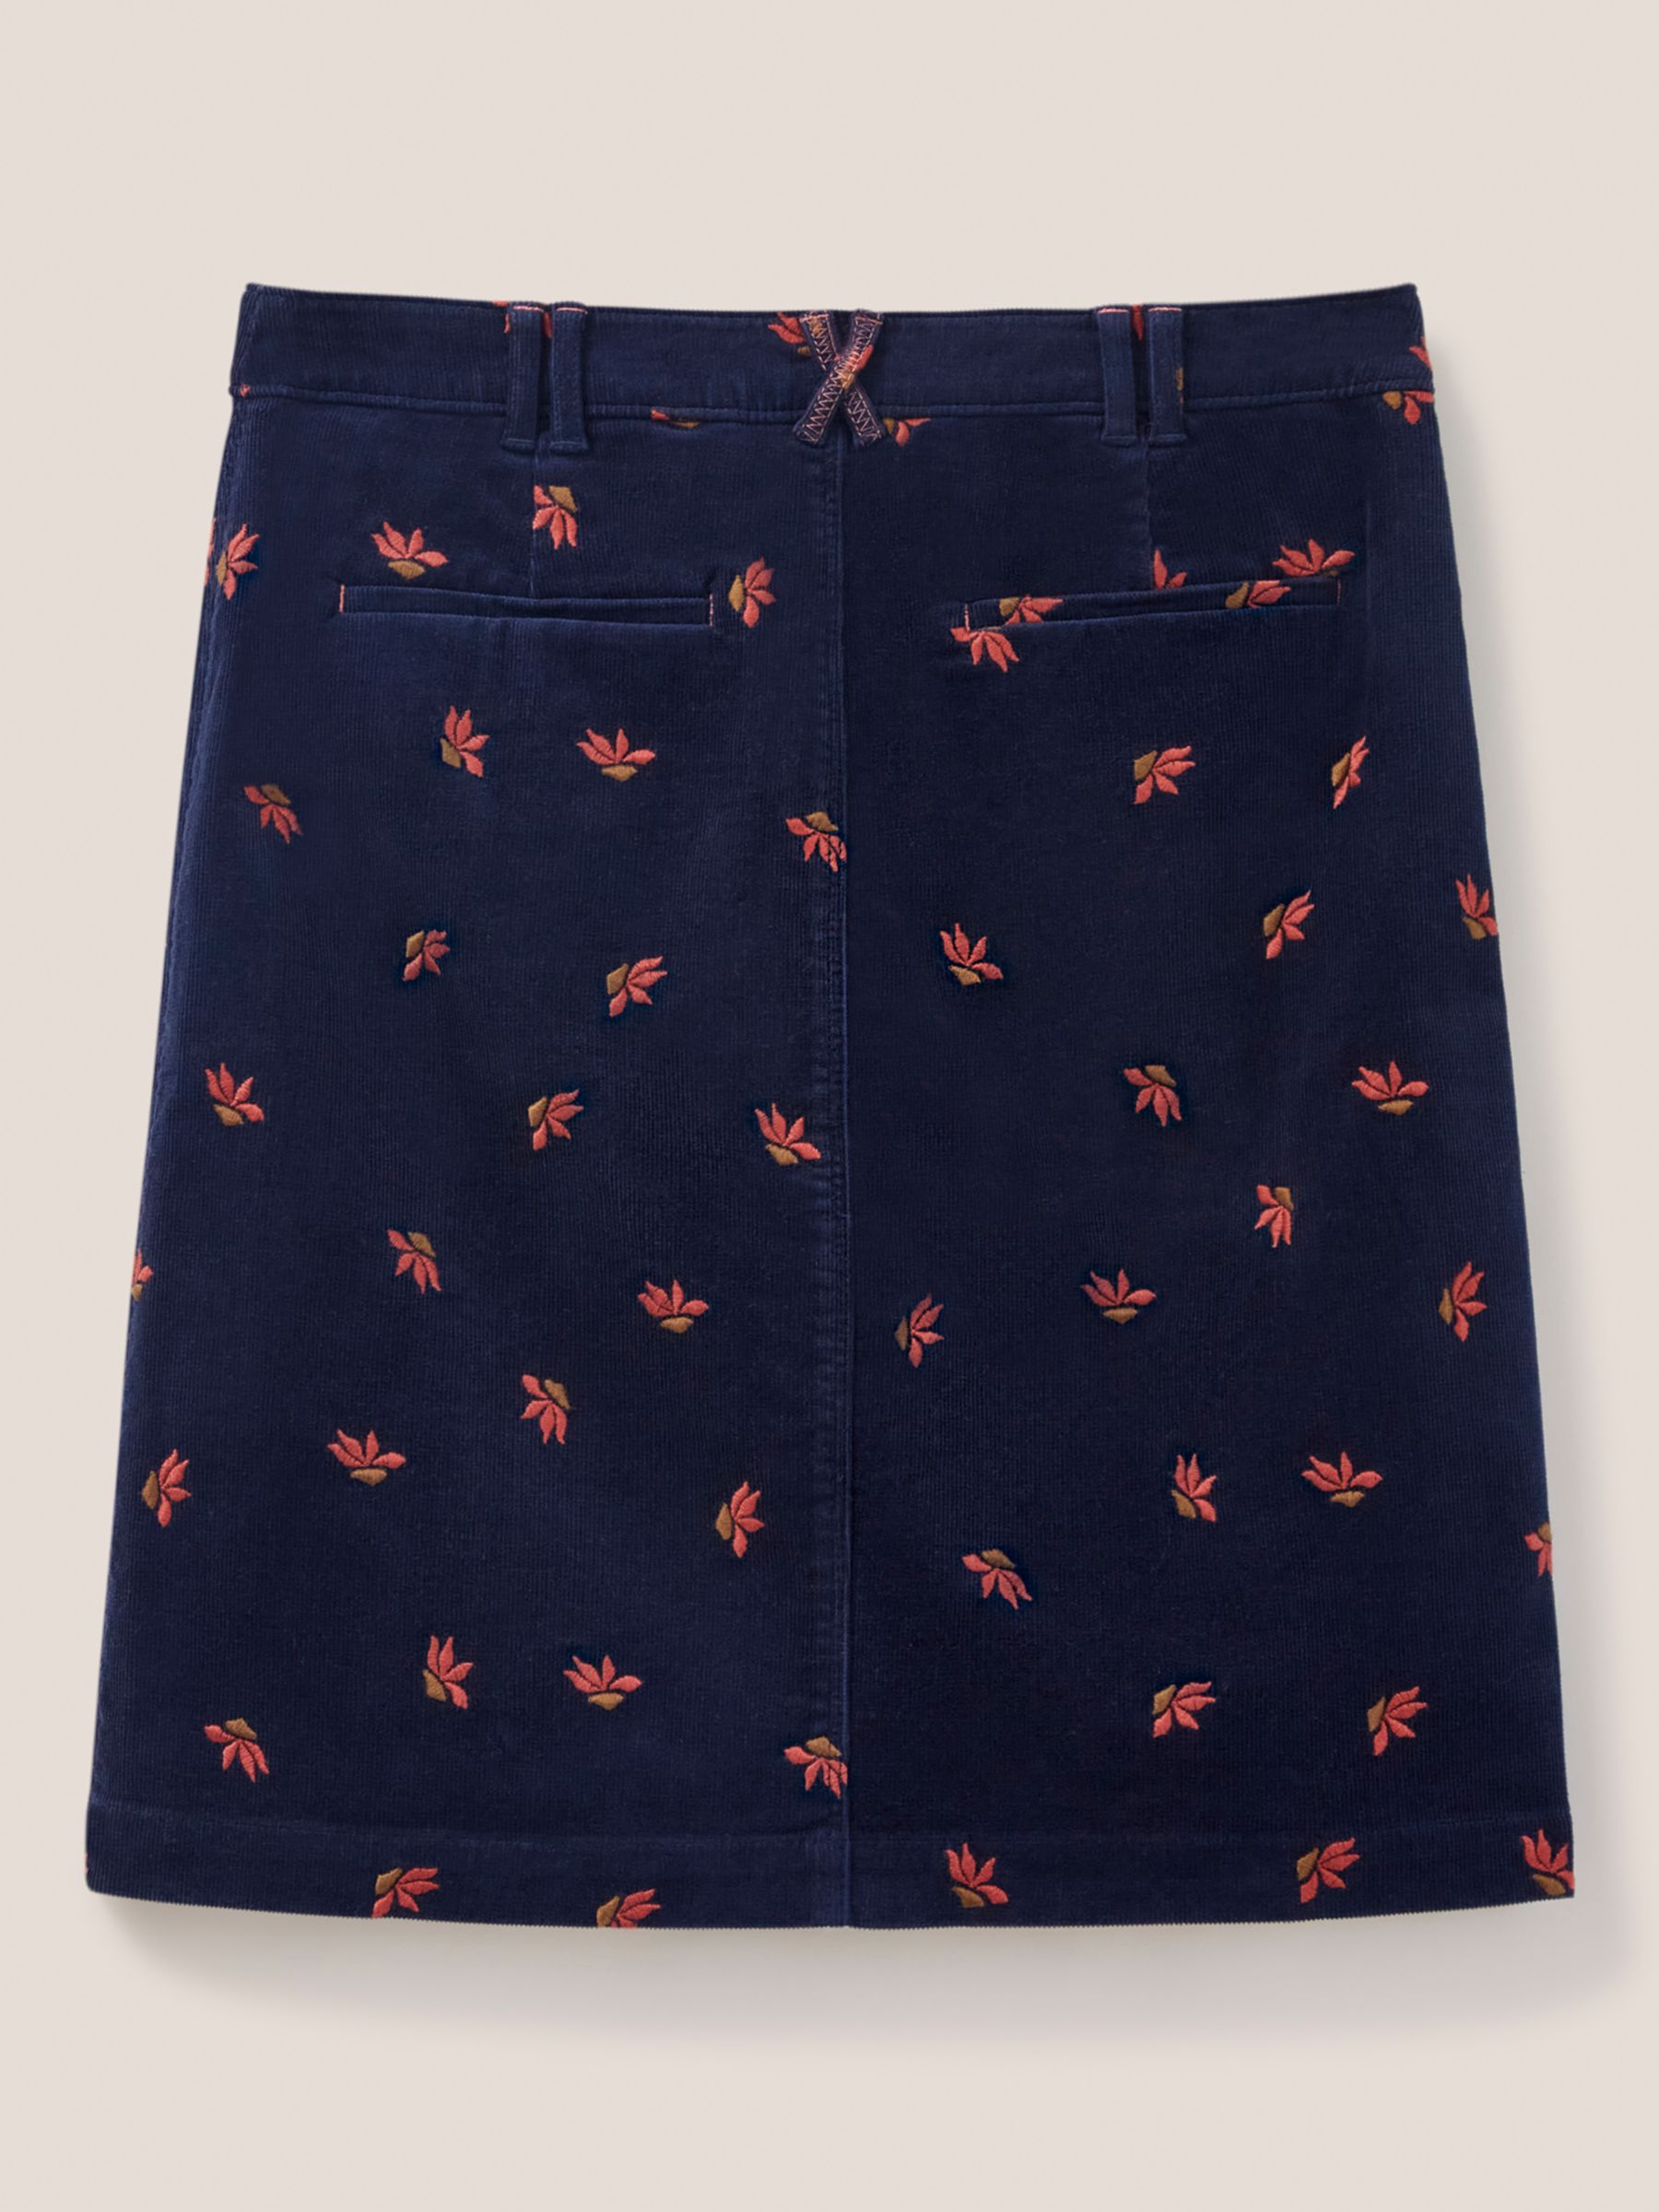 Buy White Stuff Melody Embroidered Corduroy Skirt, Navy Multi Online at johnlewis.com